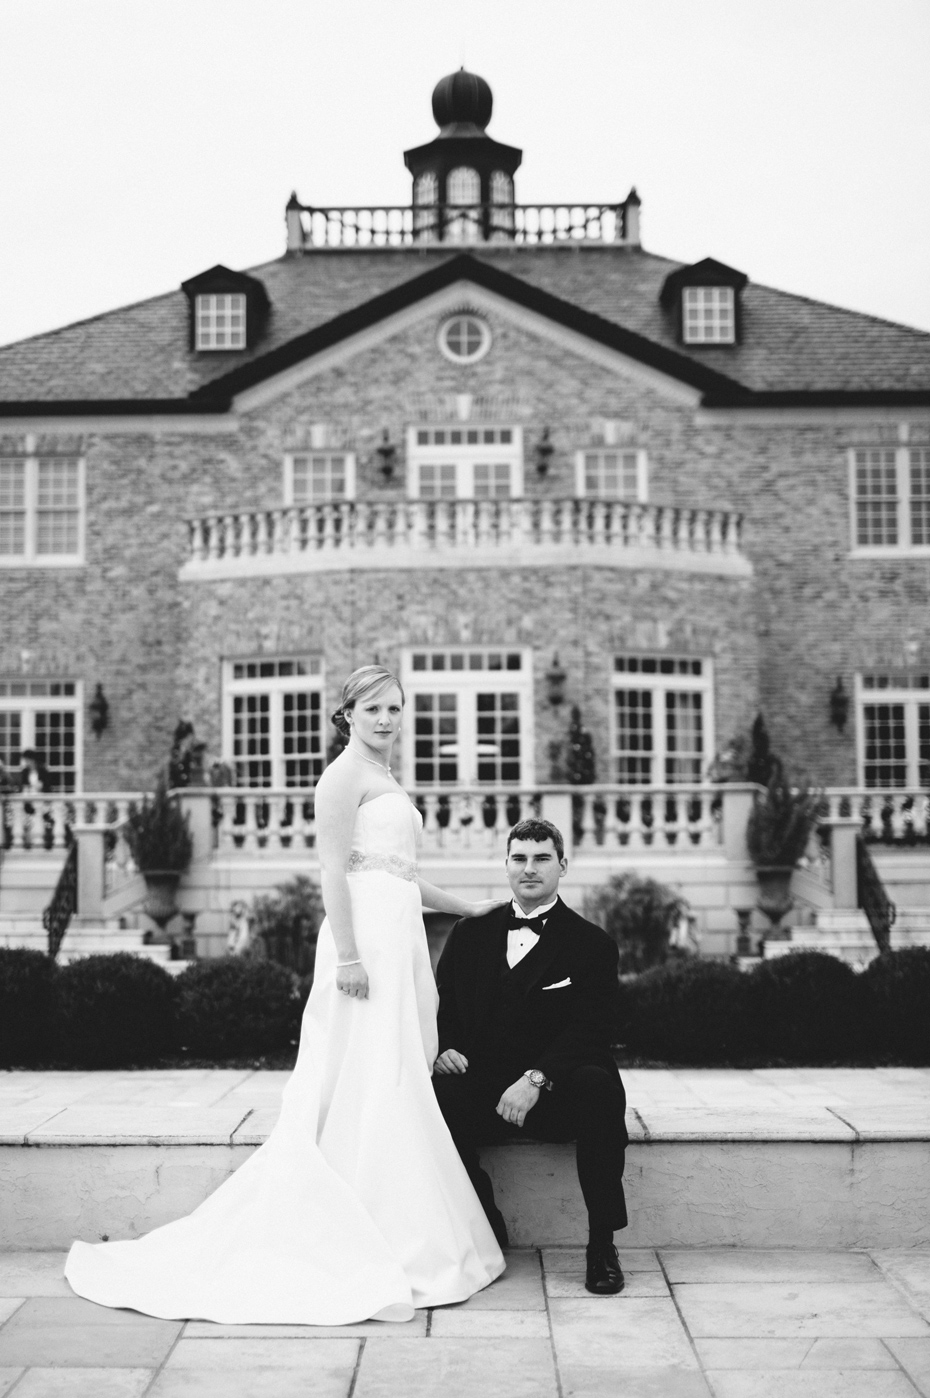 Black and white bride and groom wedding portraits with southern charm at the Fountainview mansion, photographed by Ann Arbor Wedding Photographer Heather Jowett.